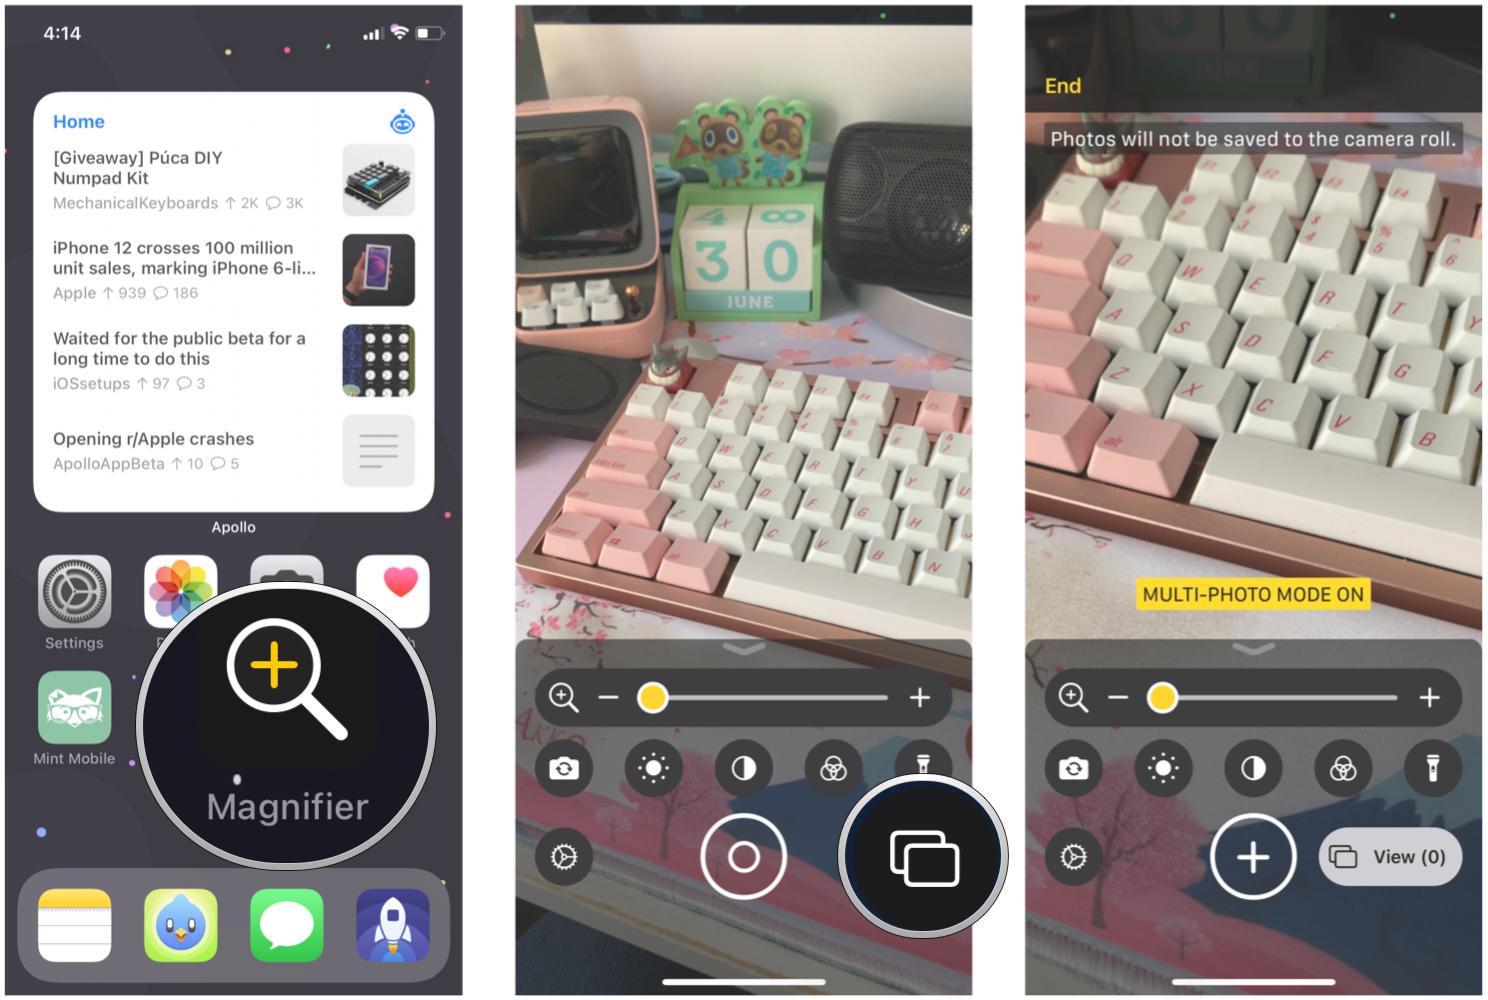 How to enable Multi-Photo mode in Magnifier with IOS 15 by showing: Launch Magnifier, tap Multi-Photo Mode in the bottom right